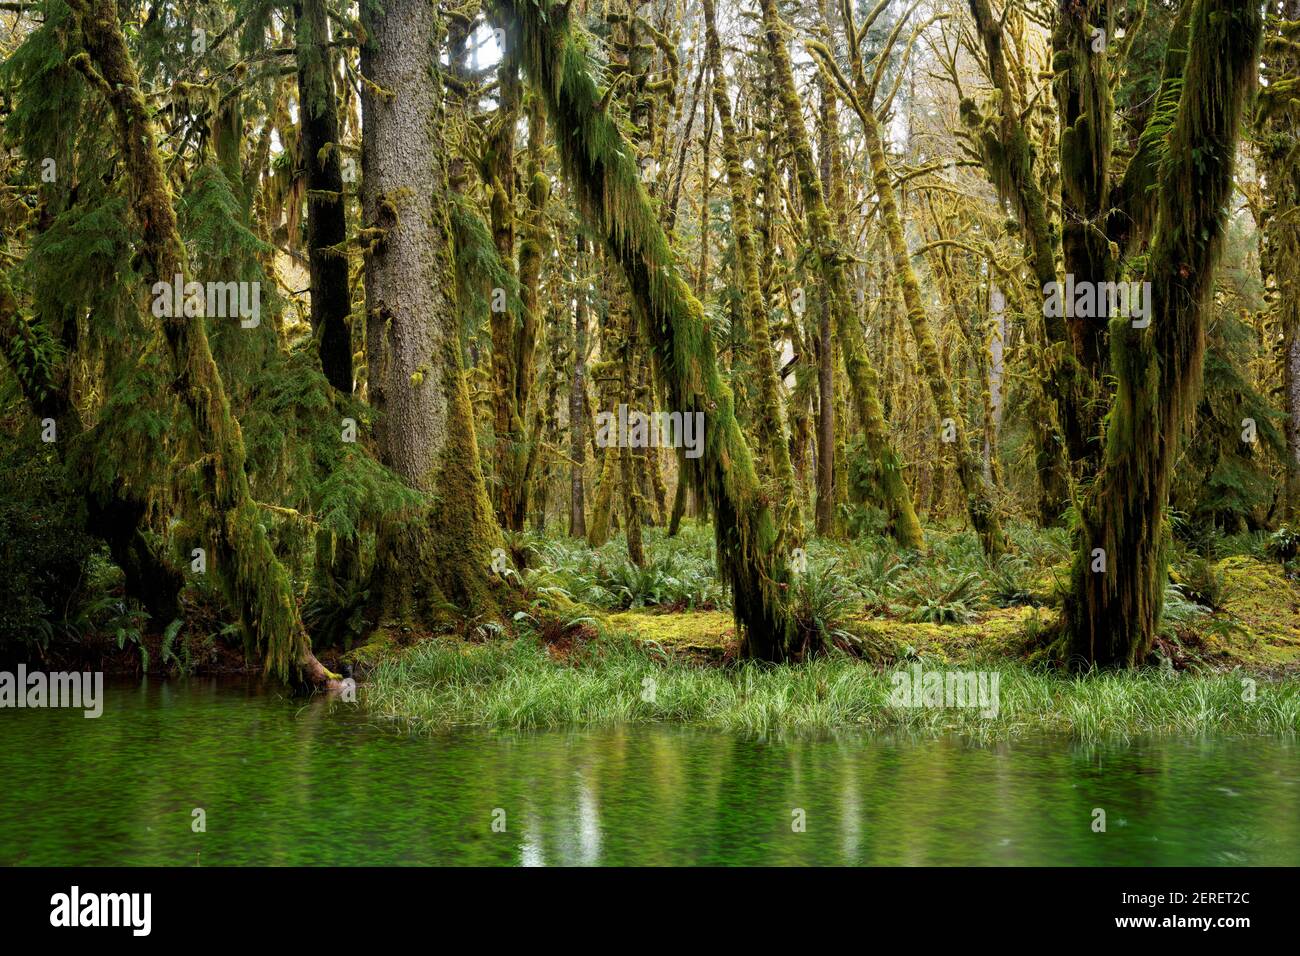 Wetland pond in temperate old-growth forest, Maple Glade Loop Trail, Quinault Rainforest, Olympic National Park, Grays Harbor County, Washington, USA Stock Photo